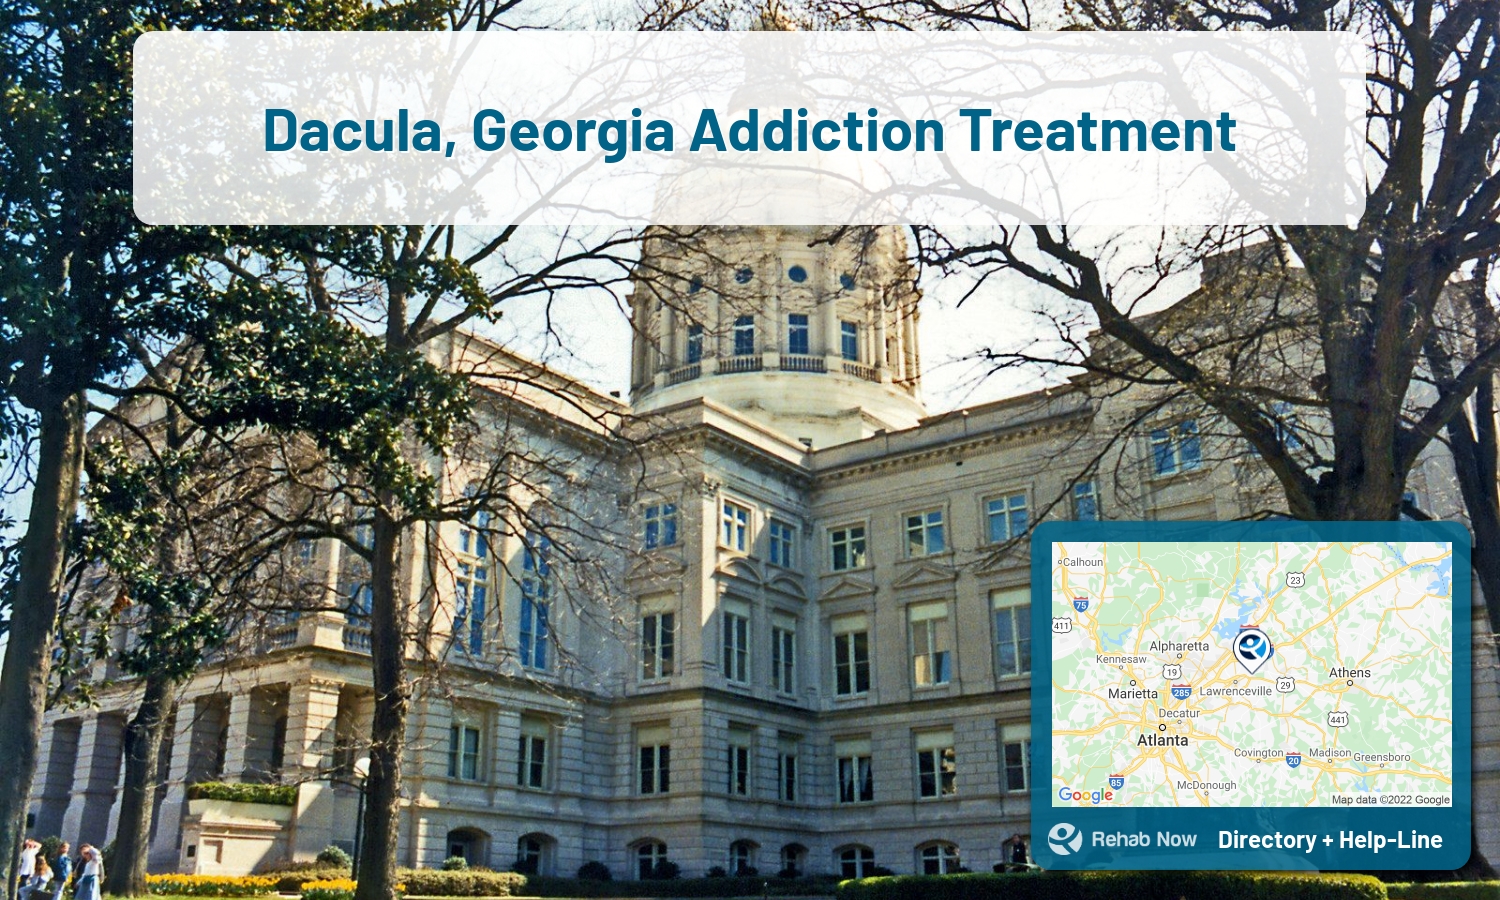 List of alcohol and drug treatment centers near you in Dacula, Georgia. Research certifications, programs, methods, pricing, and more.